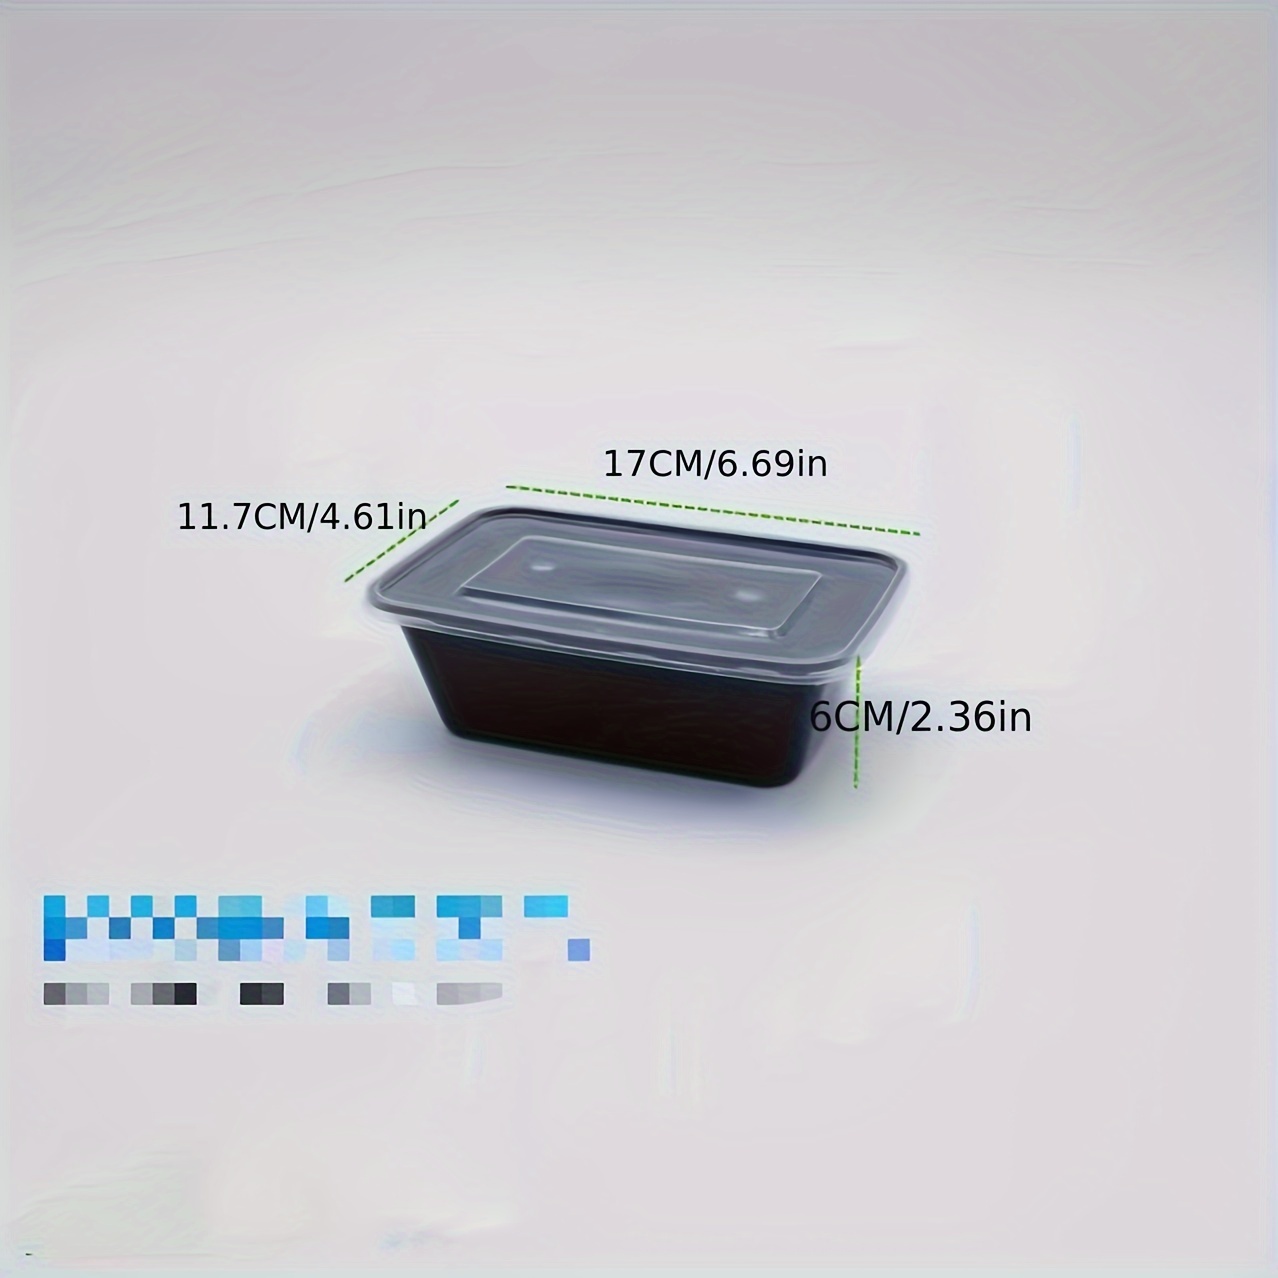 1000ml Disposable Plastic Food Containers